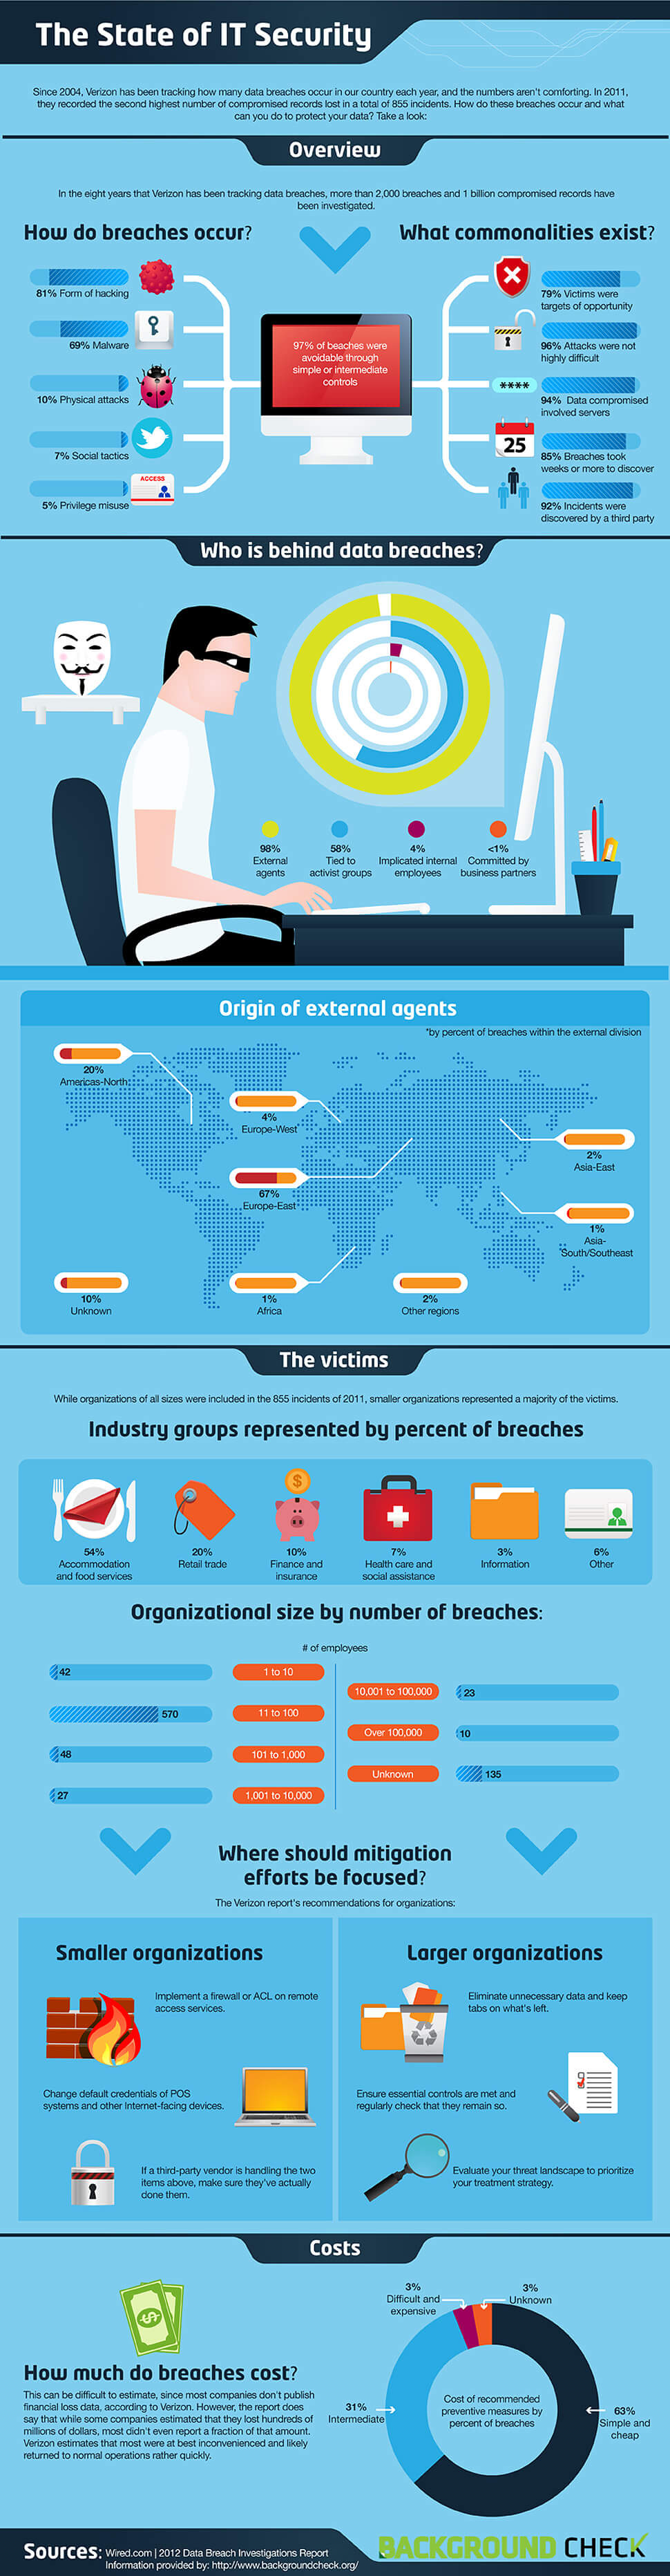 state-of-it-security-infographic